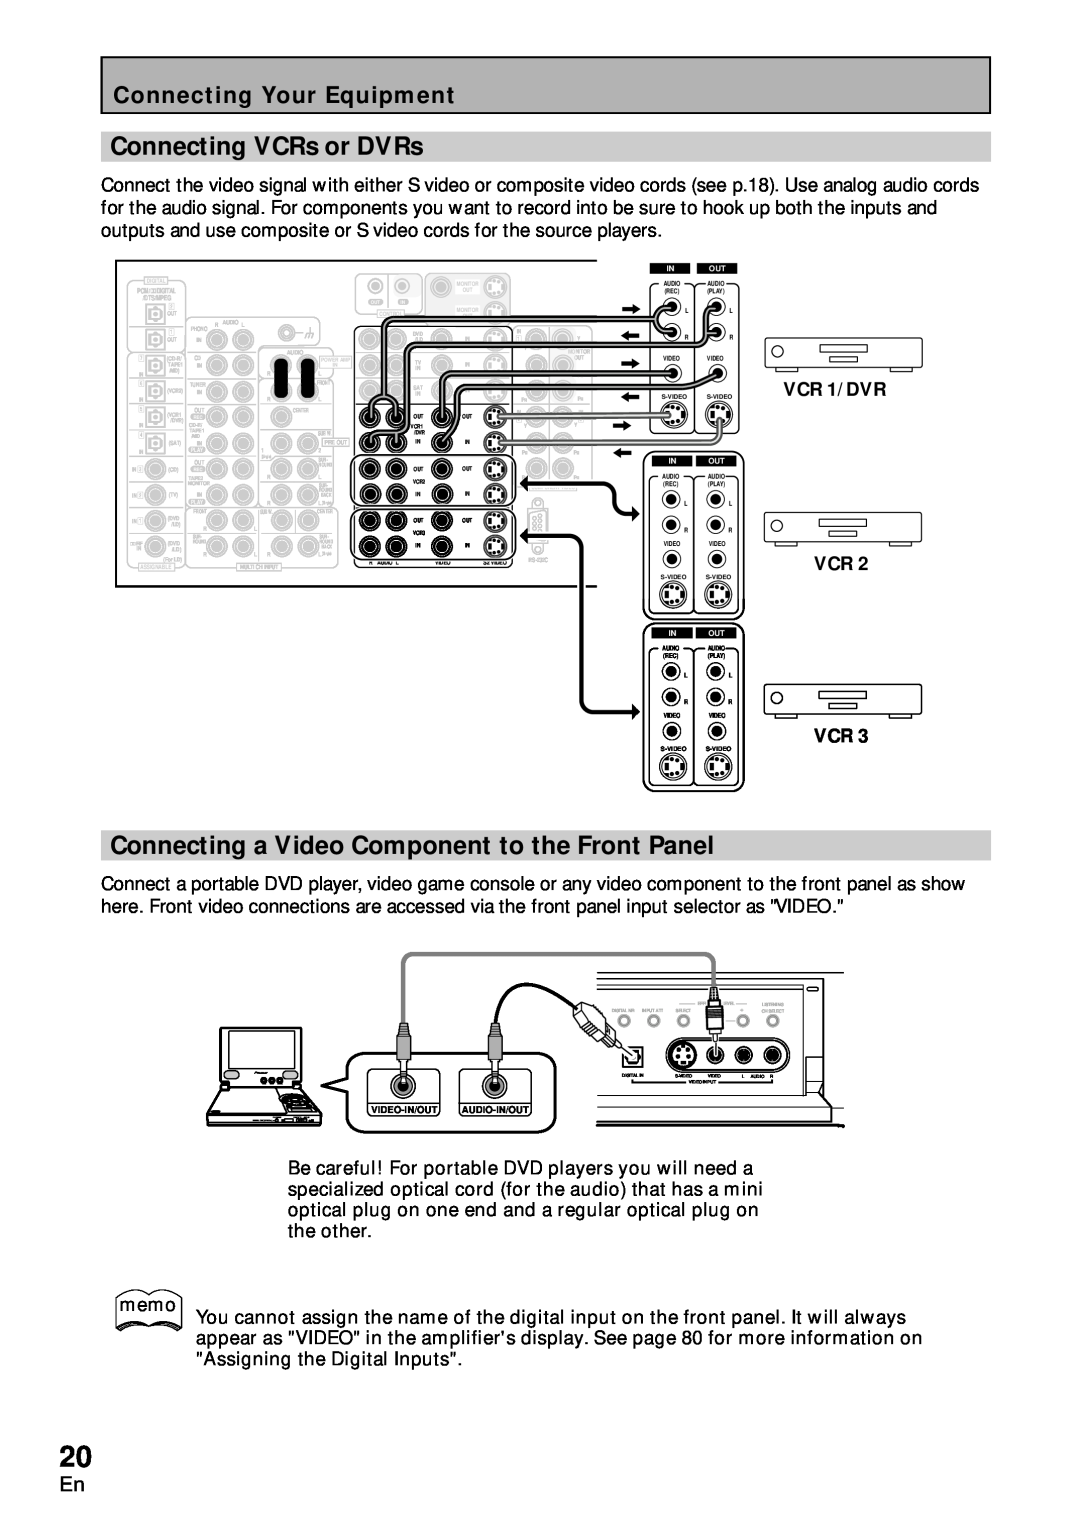 Pioneer VSA-AX10 operating instructions Connecting VCRs or DVRs, Connecting a Video Component to the Front Panel, VCR 1/DVR 